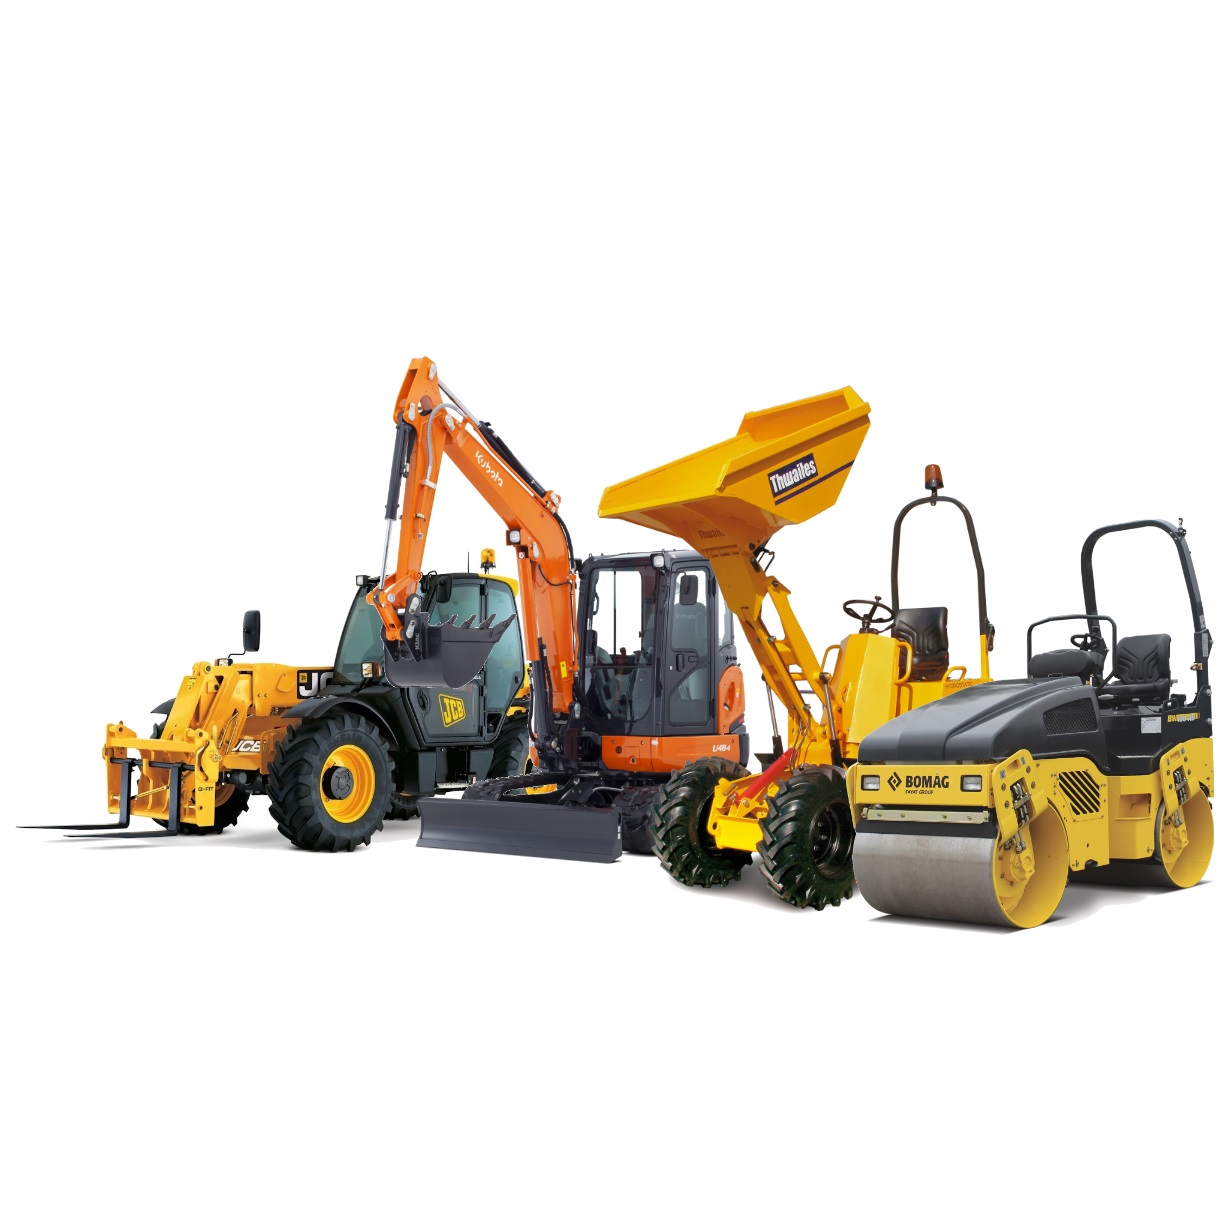 Plant Hire in Reading